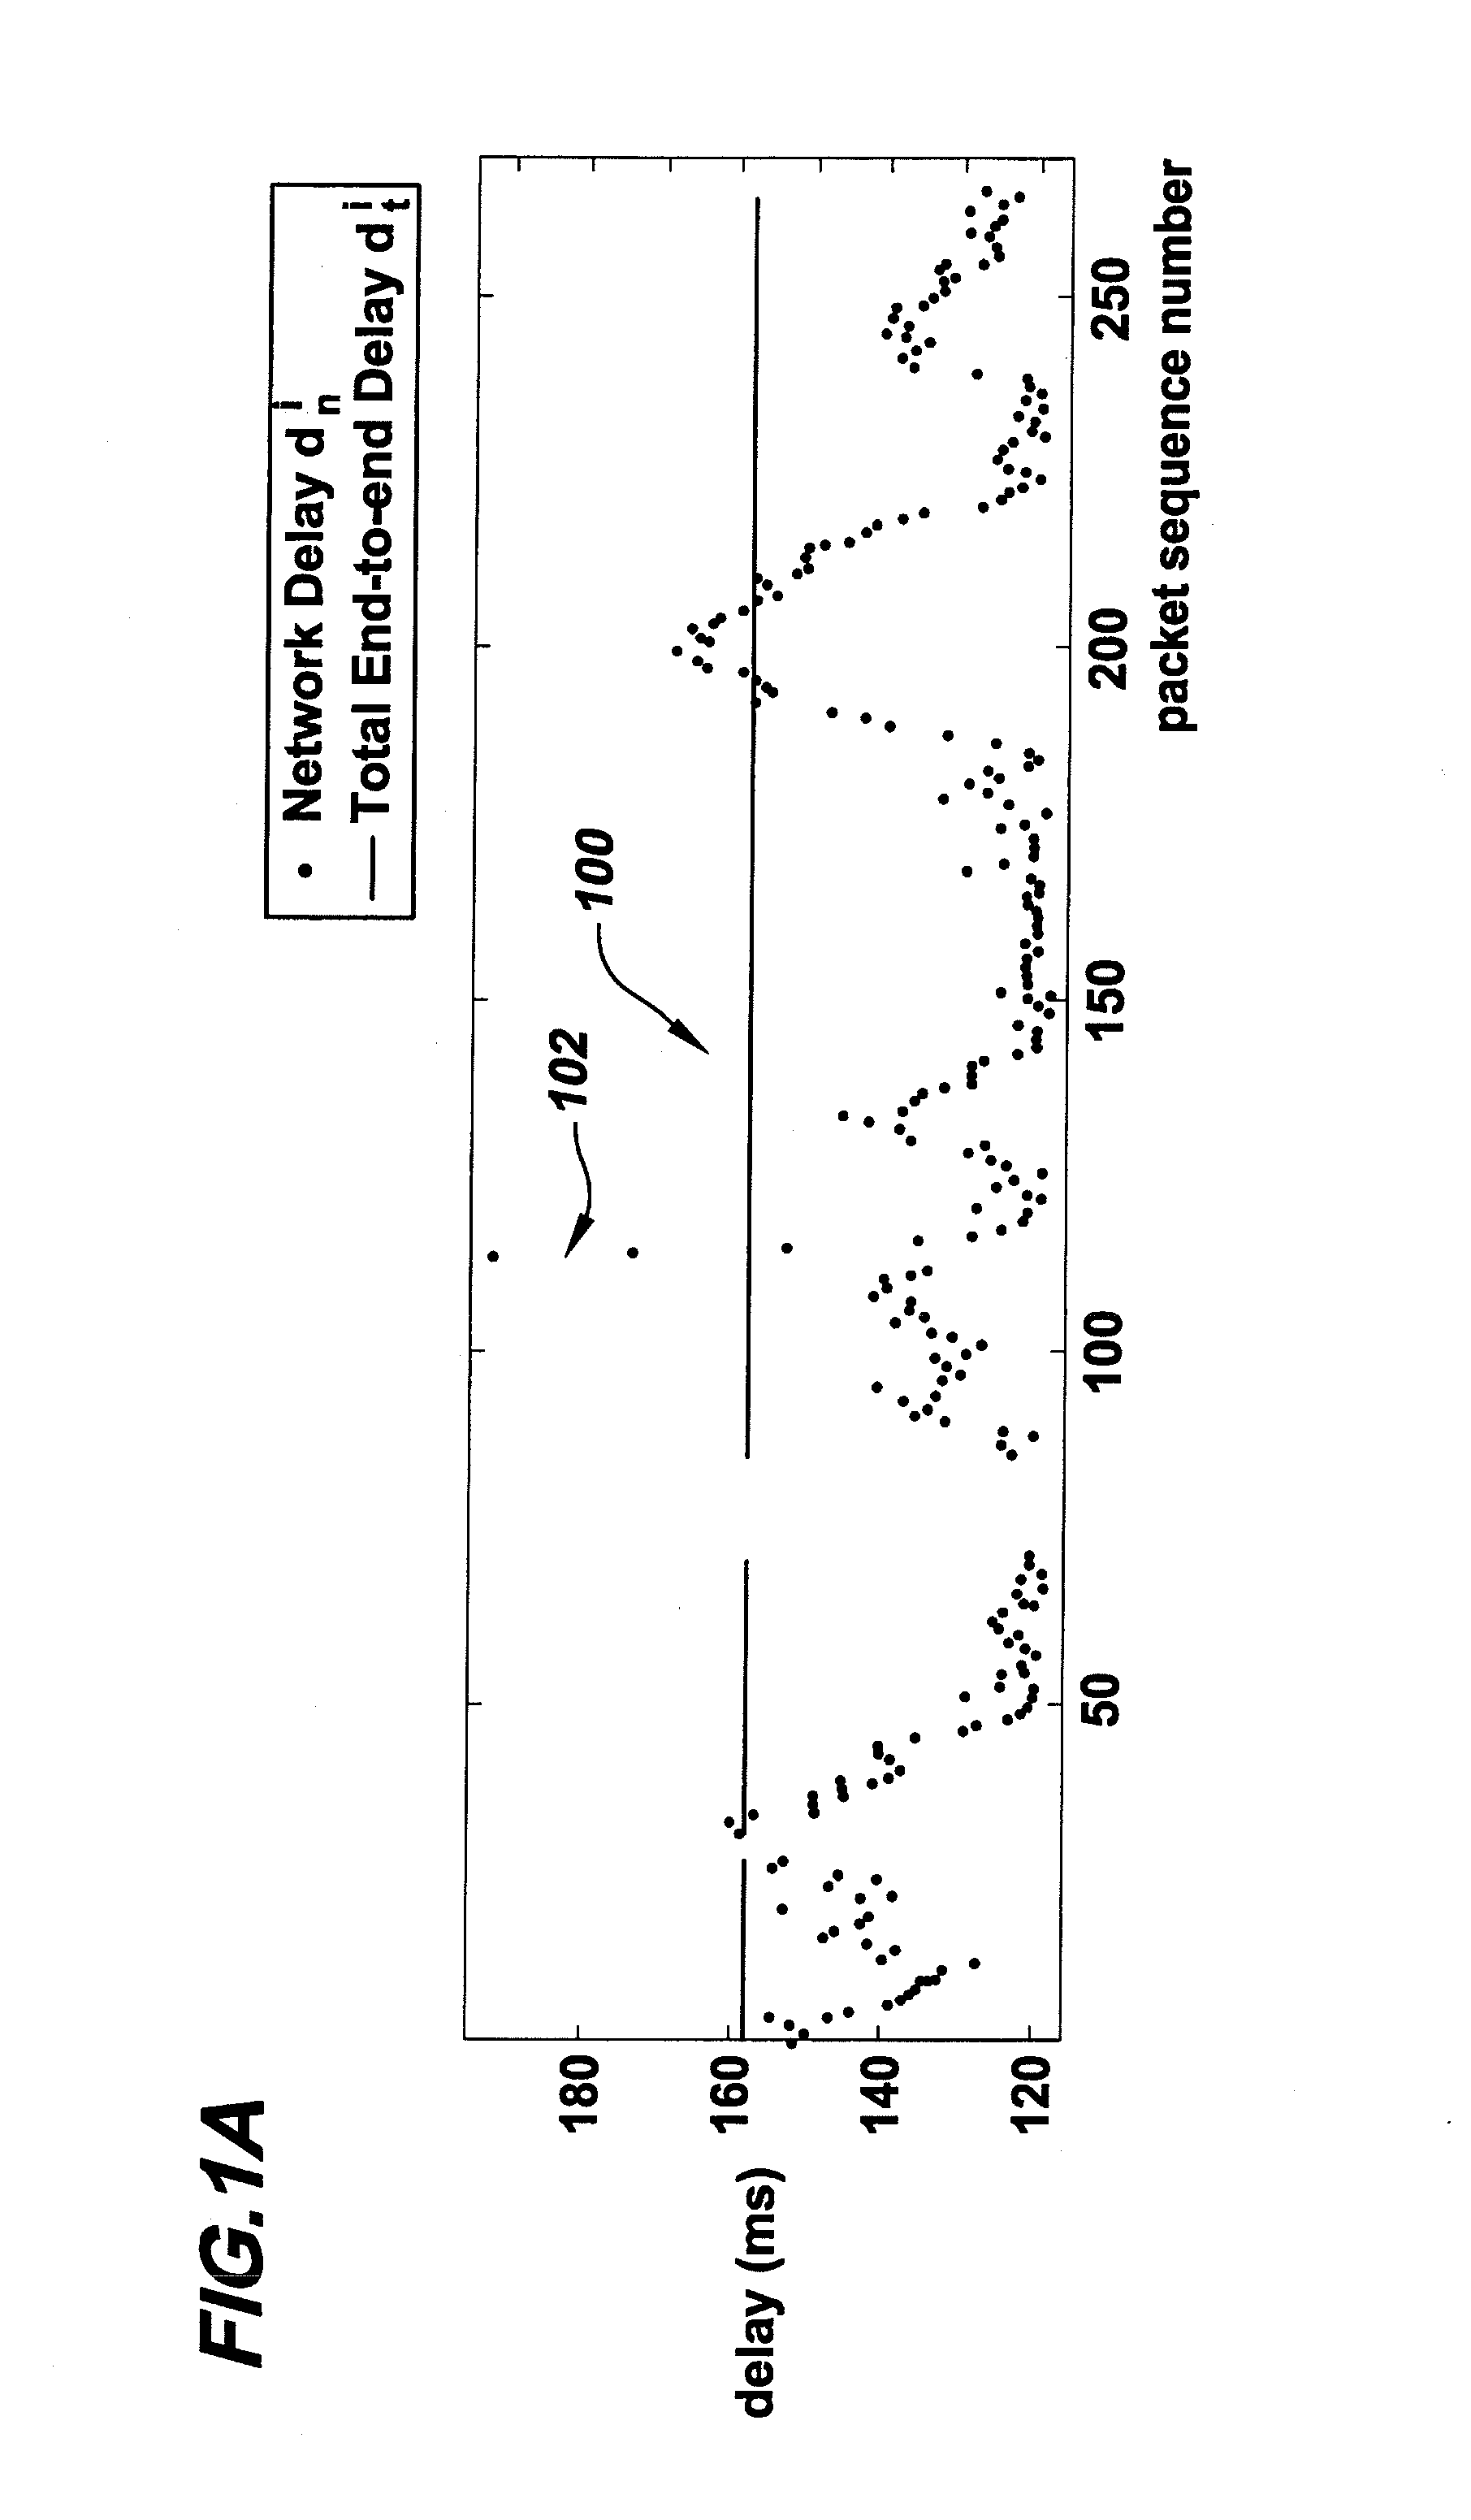 Adaptive playout scheduling for multimedia communication